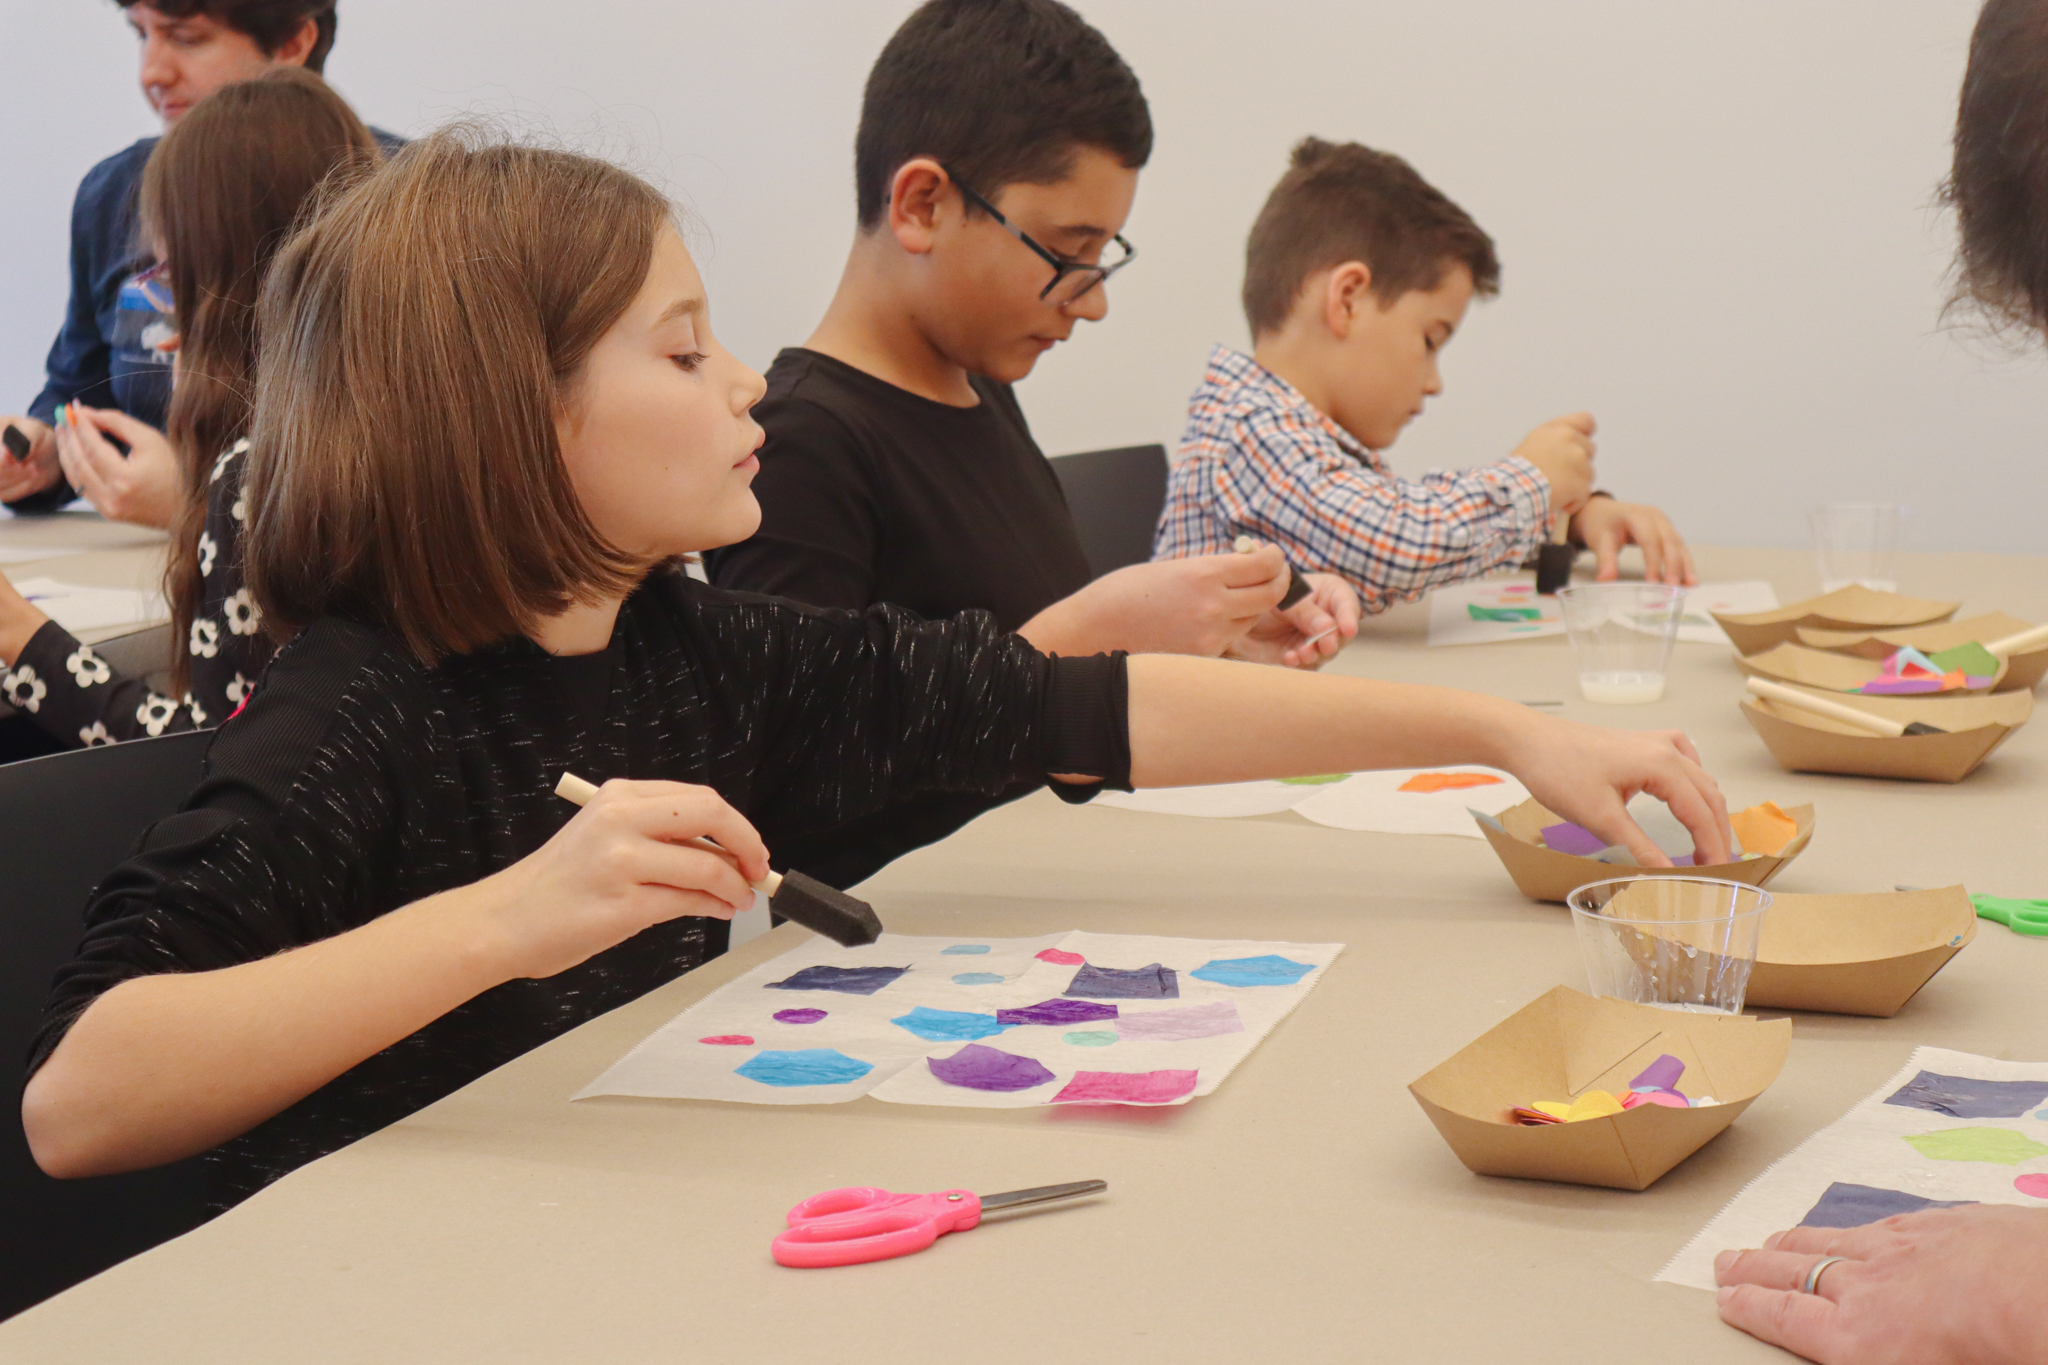 Several children sit at a table engaged in art making